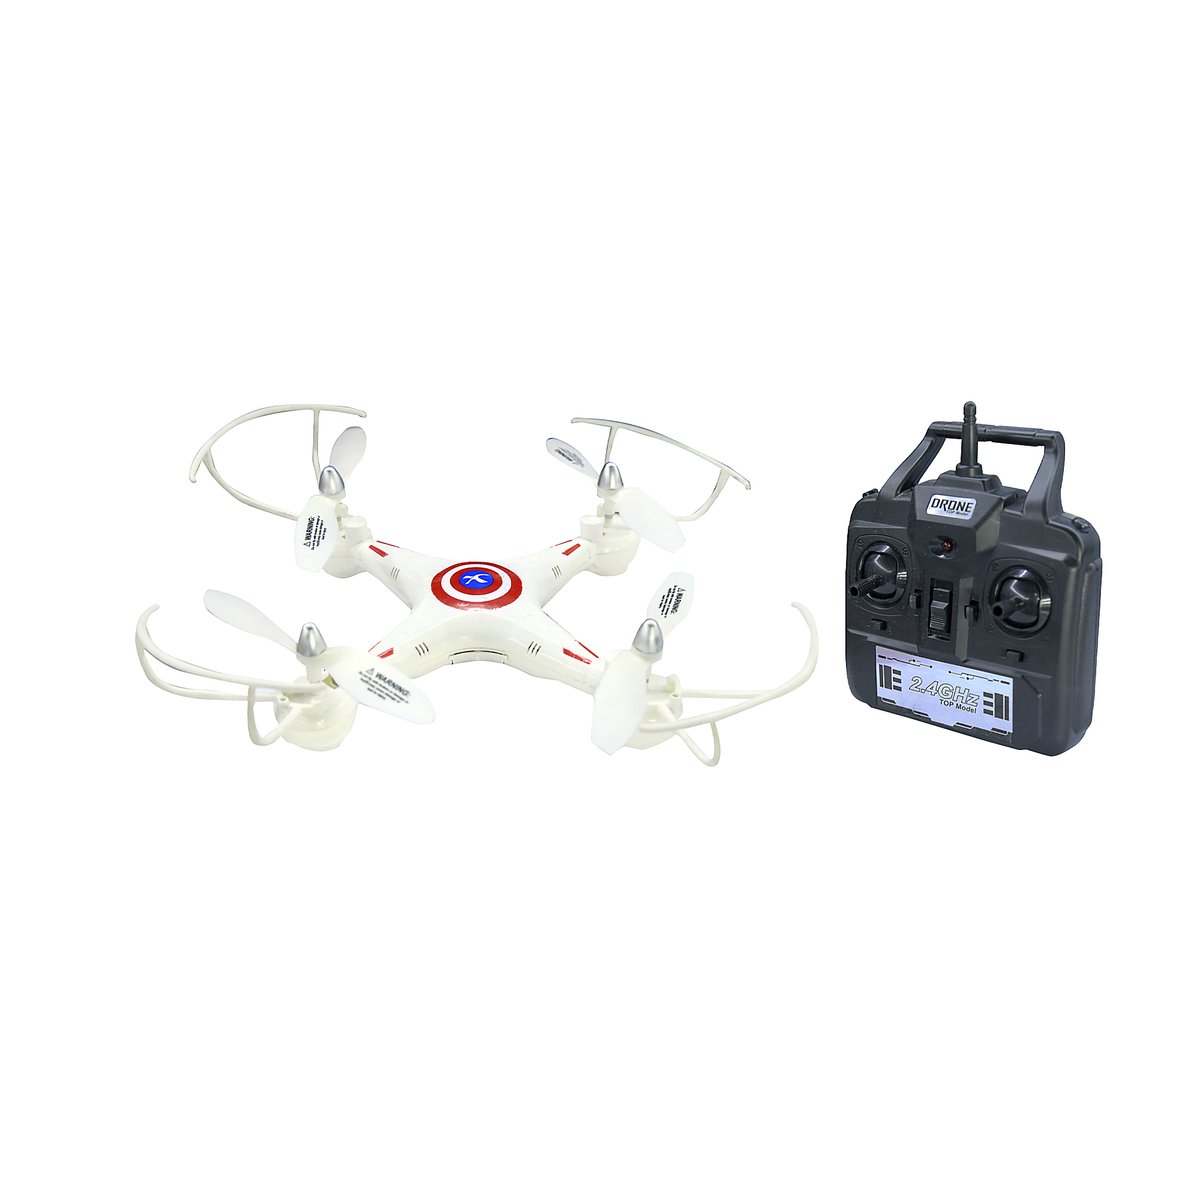 Mytoys Remote Controlled Quadcopter 4Channel  MT290